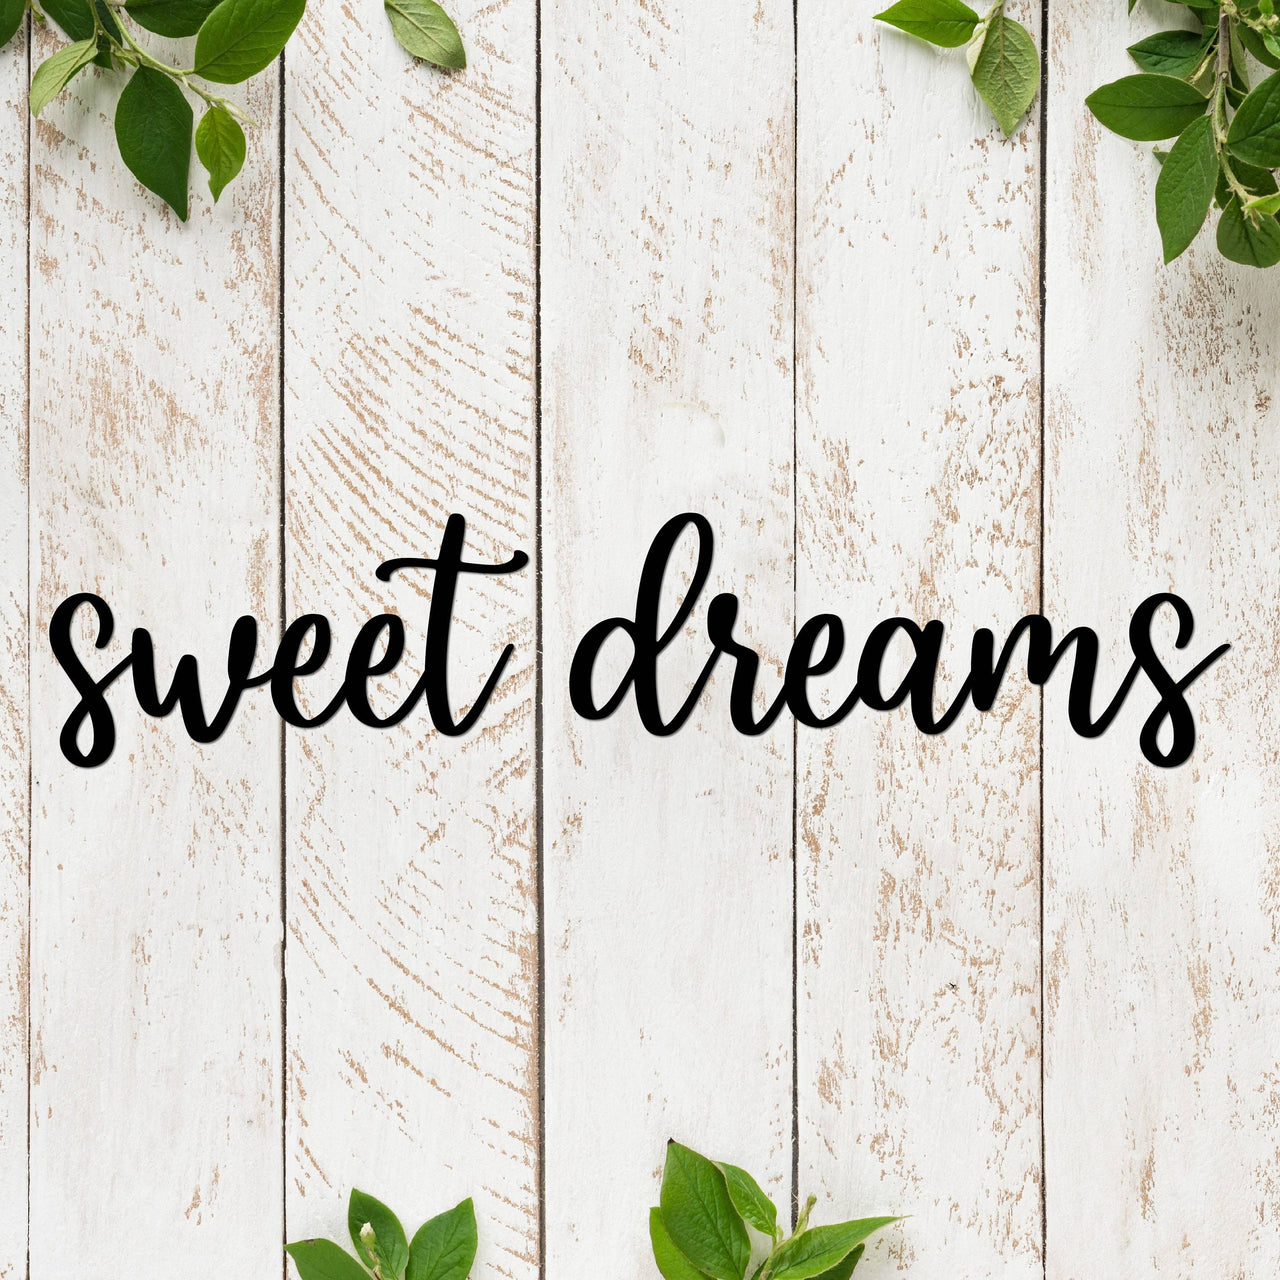 Sweet Dreams Sign | Above Bed Decor | Over the Bed Wall Decor | Metal Words | Nursery Decor | Bedroom Decor | Kids Room Decor | Wall Words